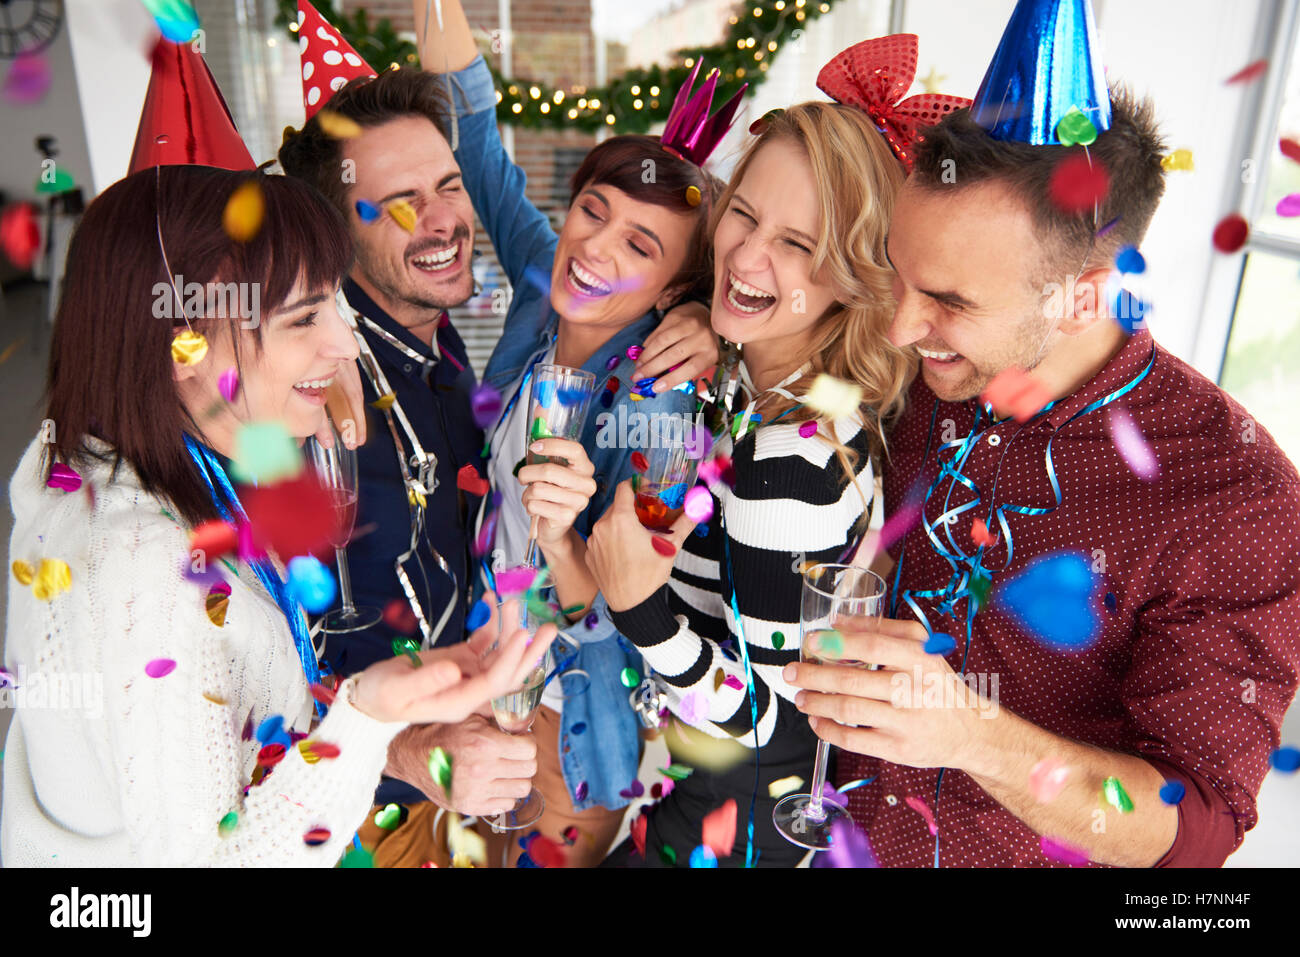 Laughing and celebrating the new years eve Stock Photo